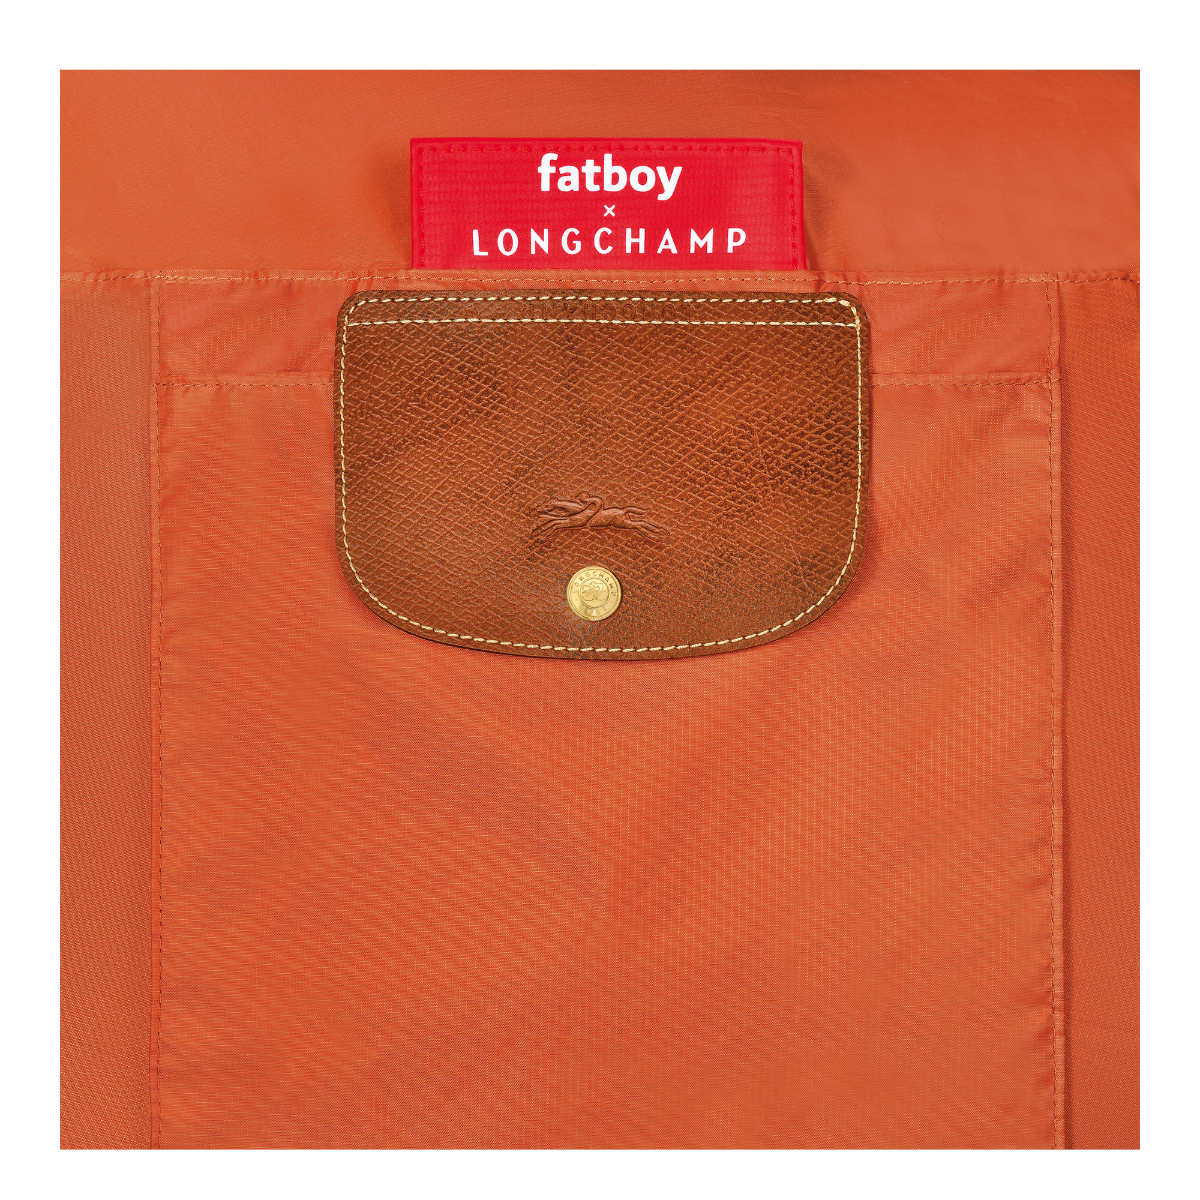 Fatboy X Longchamp - A Colorful And Comfortable Collaboration For Spring-Summer 2023